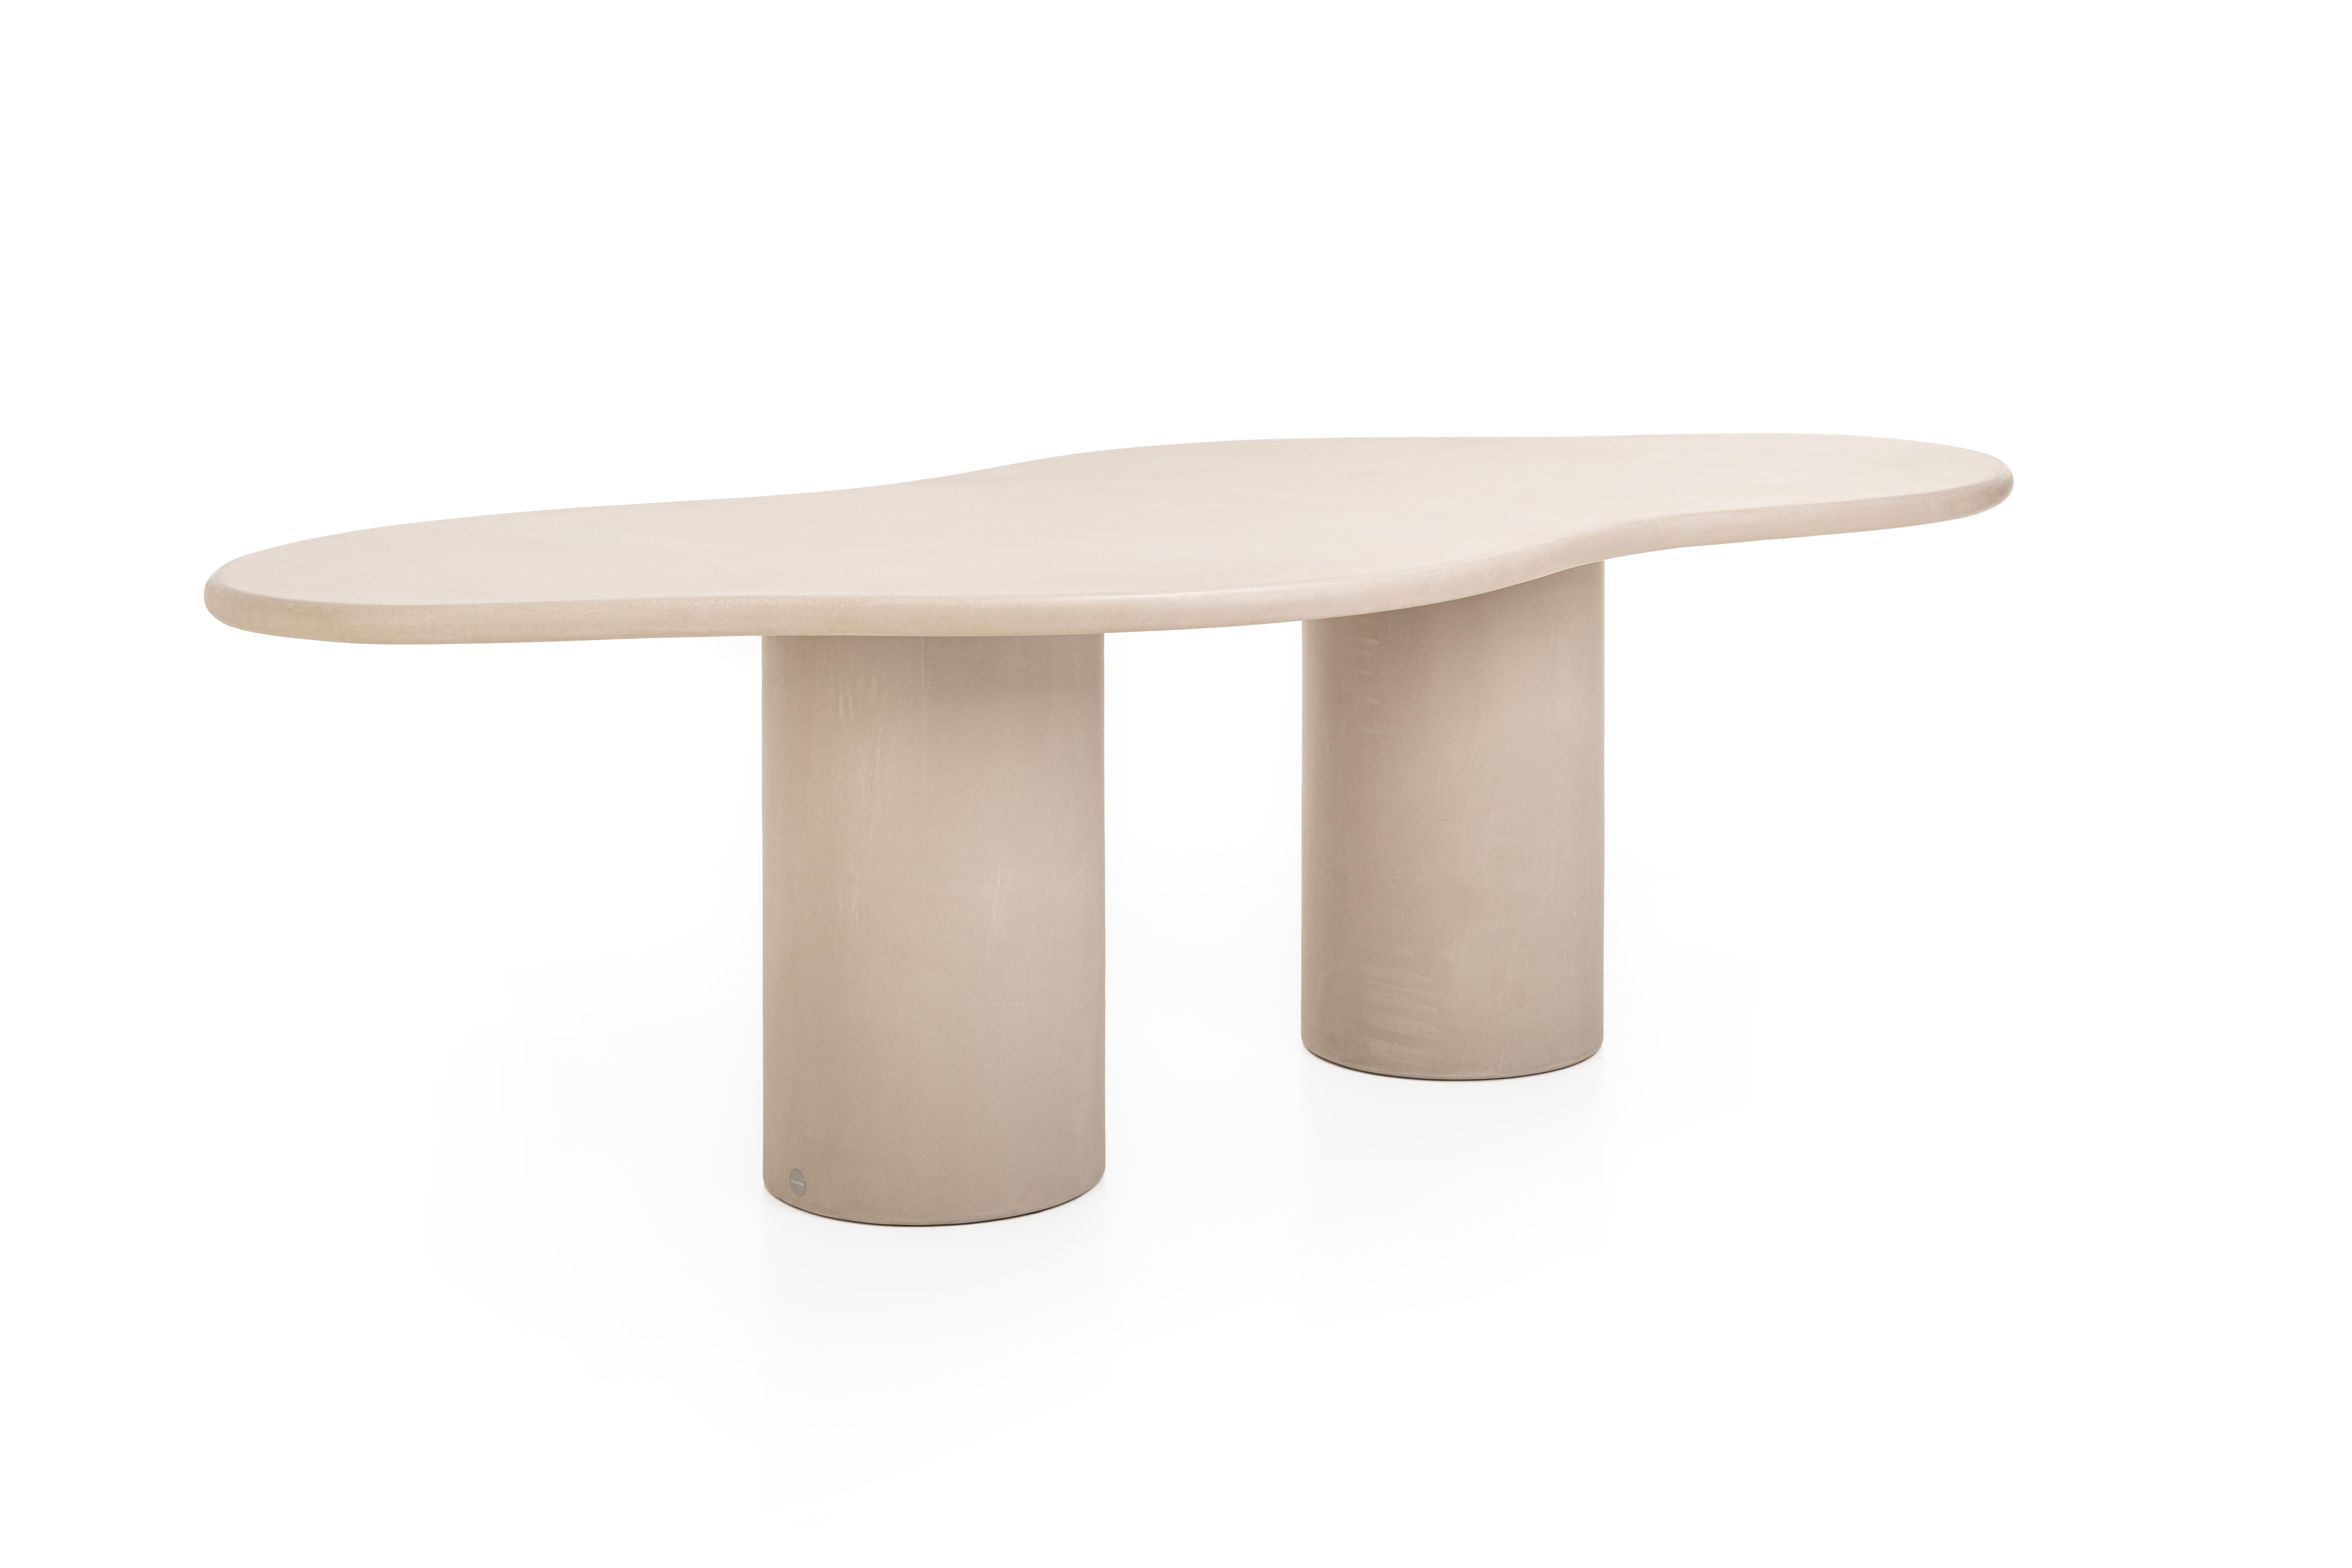 Contemporary Belgian design, handmade natural plaster table with a textured and earthy character.

Indoor use (price outdoor +10%)

Latin adjective “fluentem” (p.pr. fluō /ˈflu.o/): flowing

The Fluent dining table is handcrafted with multiple